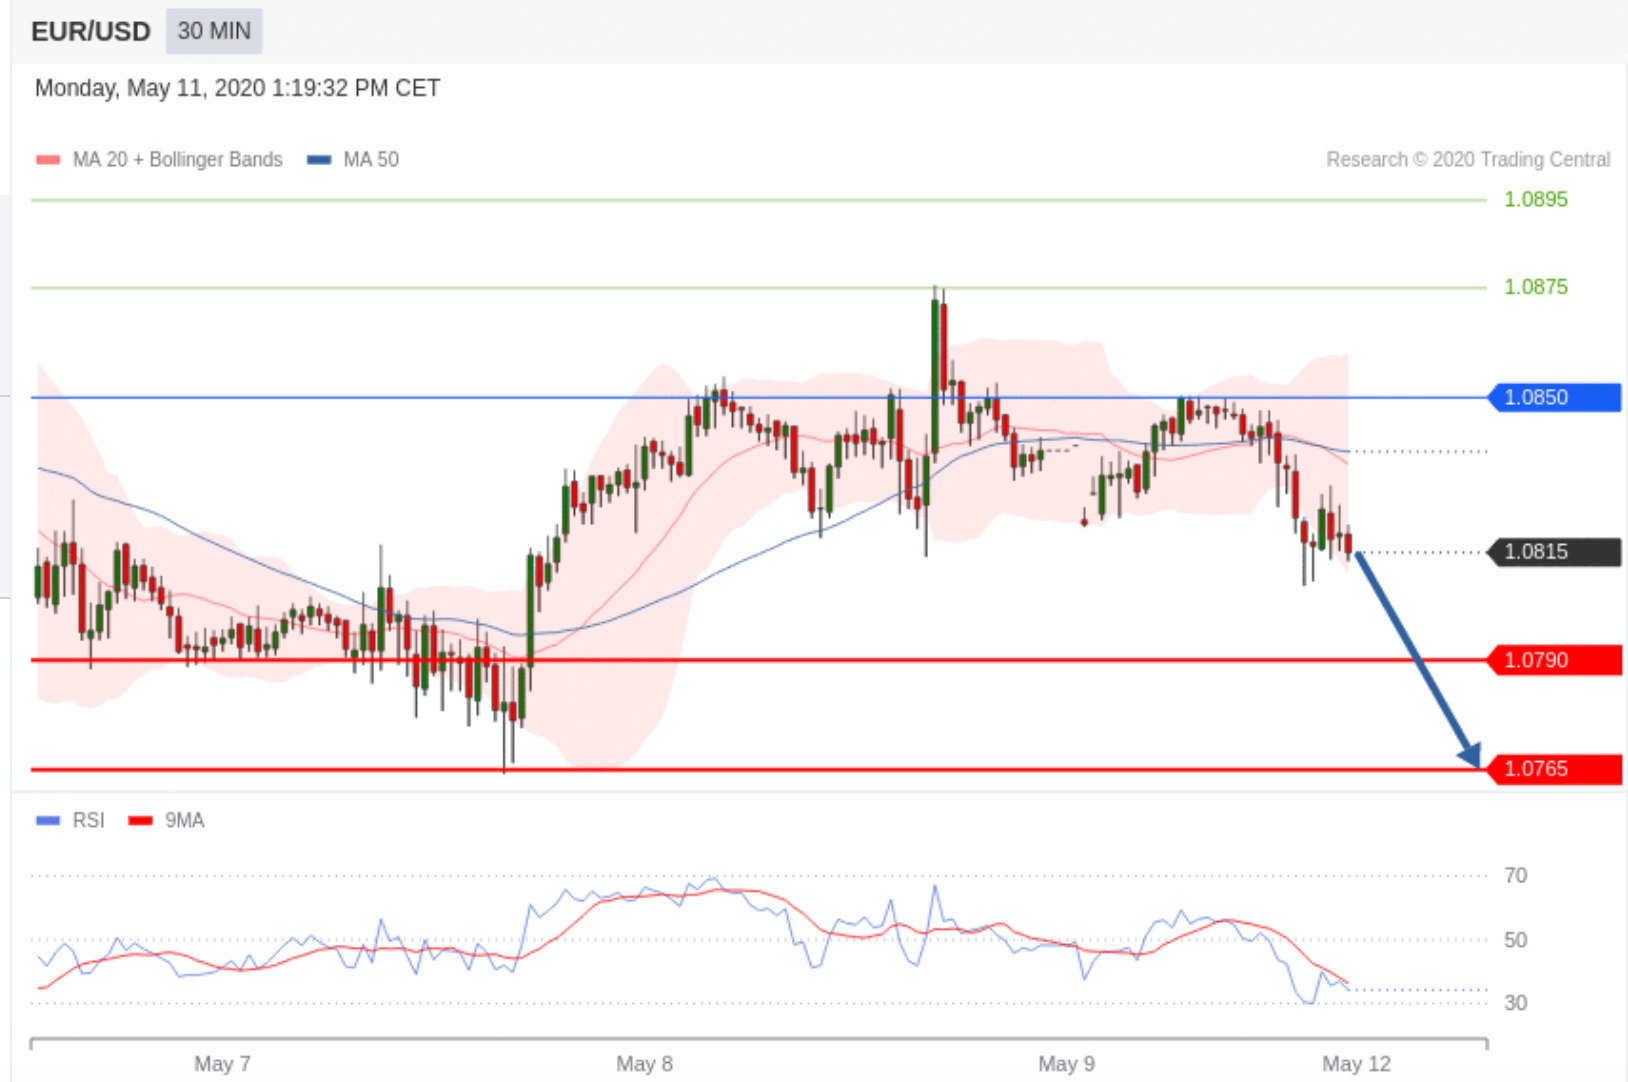 Technical Analysis : EUR/USD - May 11 2020